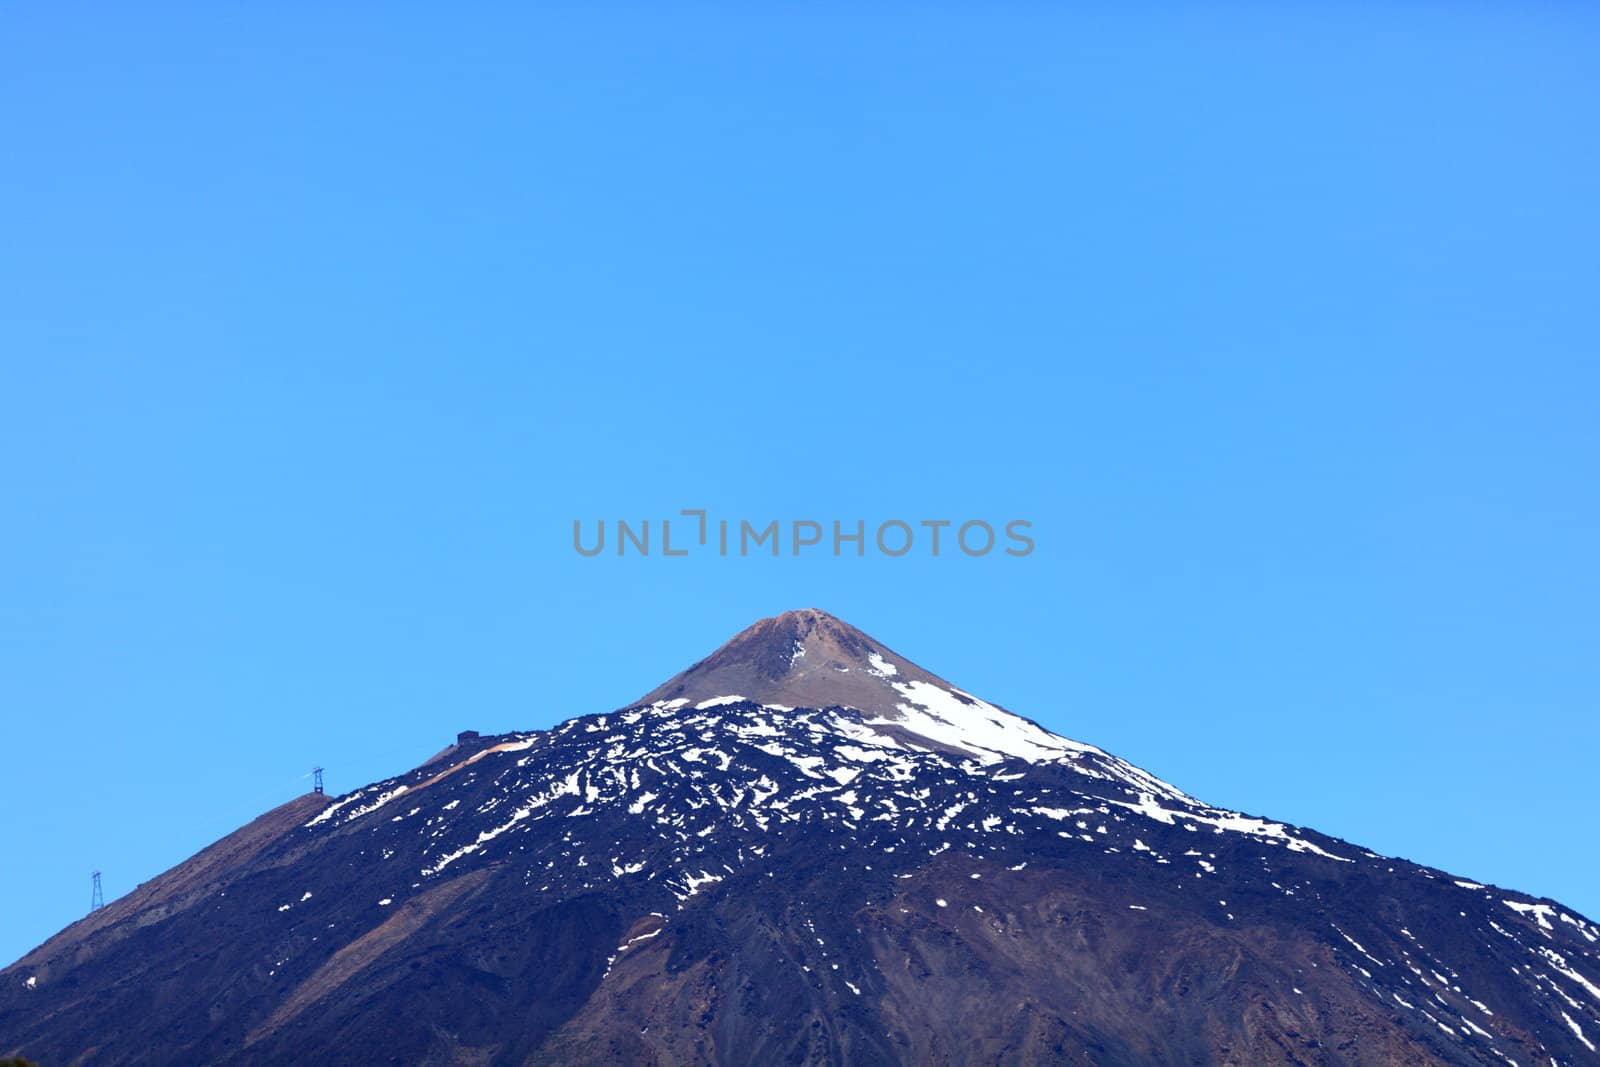 Teide mountain top. Pico del Teide - partly snow covered volcano peak photo from Tenerife during spring.